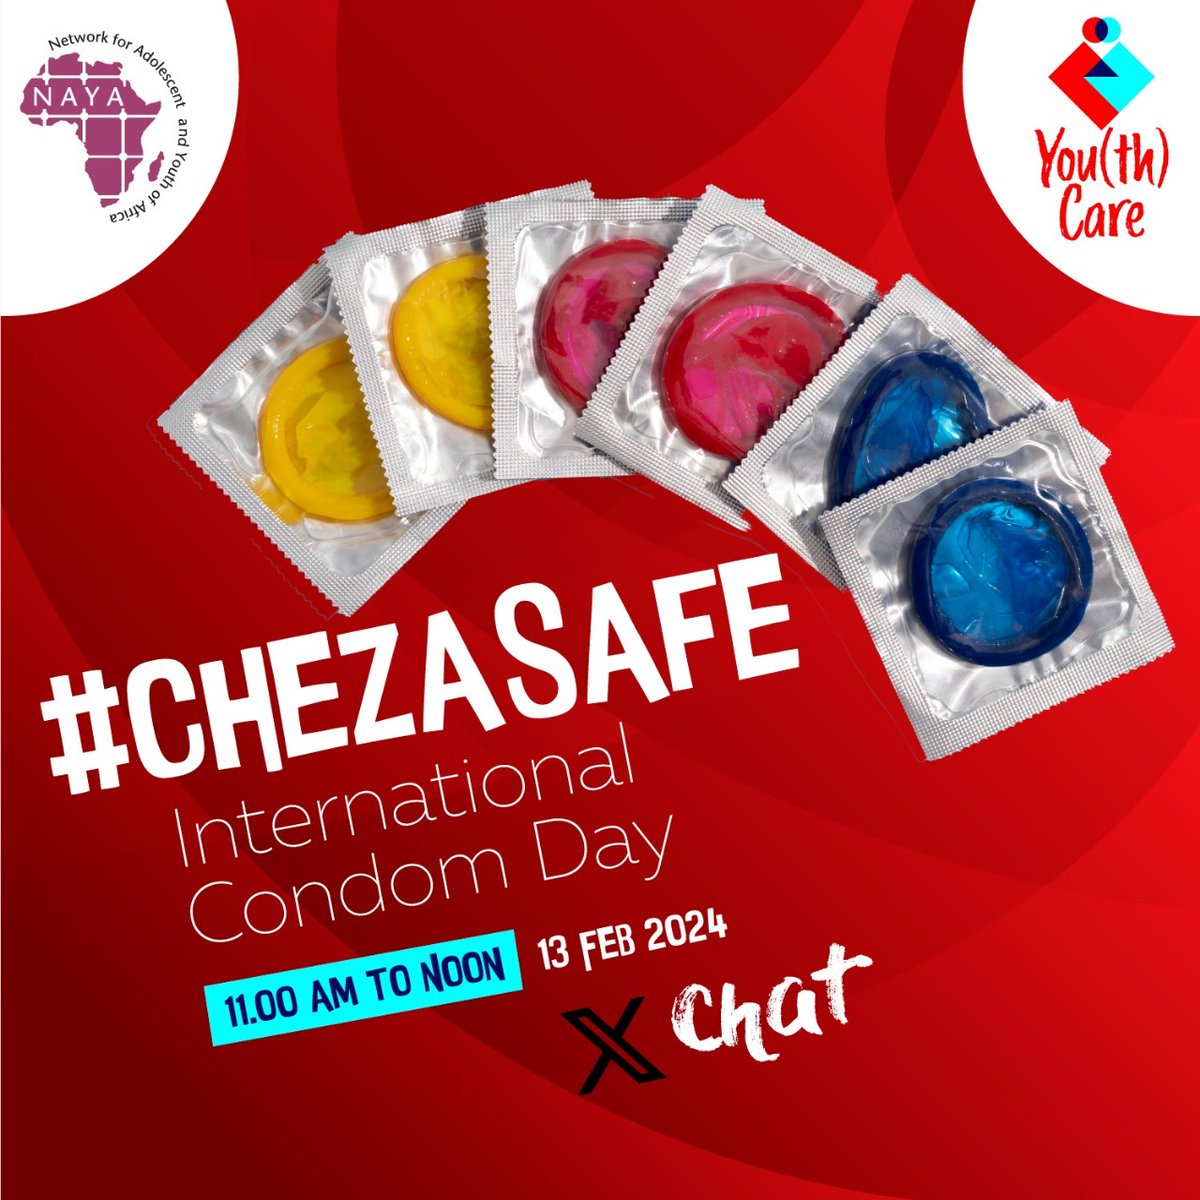 And we are LIVE! Follow the conversation via #ChezaSafe @NAYAKenya and let's empower each other, this #InternationalCondomDay